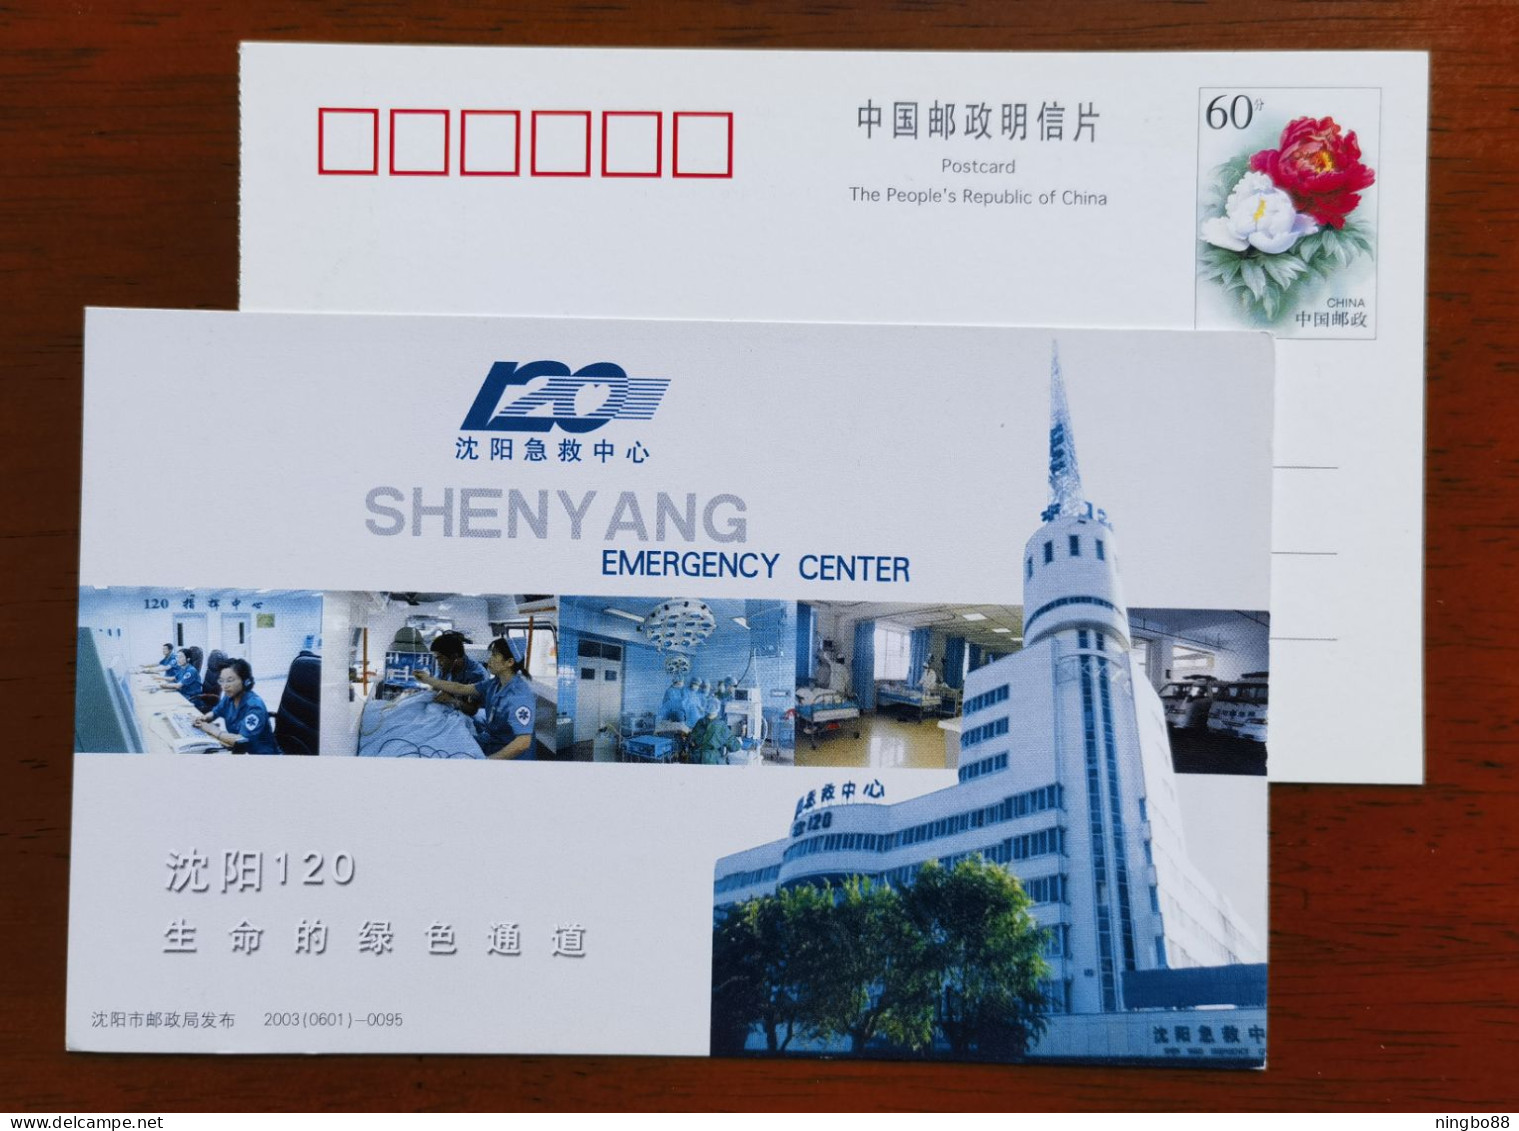 120 The Green Channel Of Life,Command Center,ambulance,China 2003 Shenyang Emergency Center Advertising Pre-stamped Card - Primo Soccorso